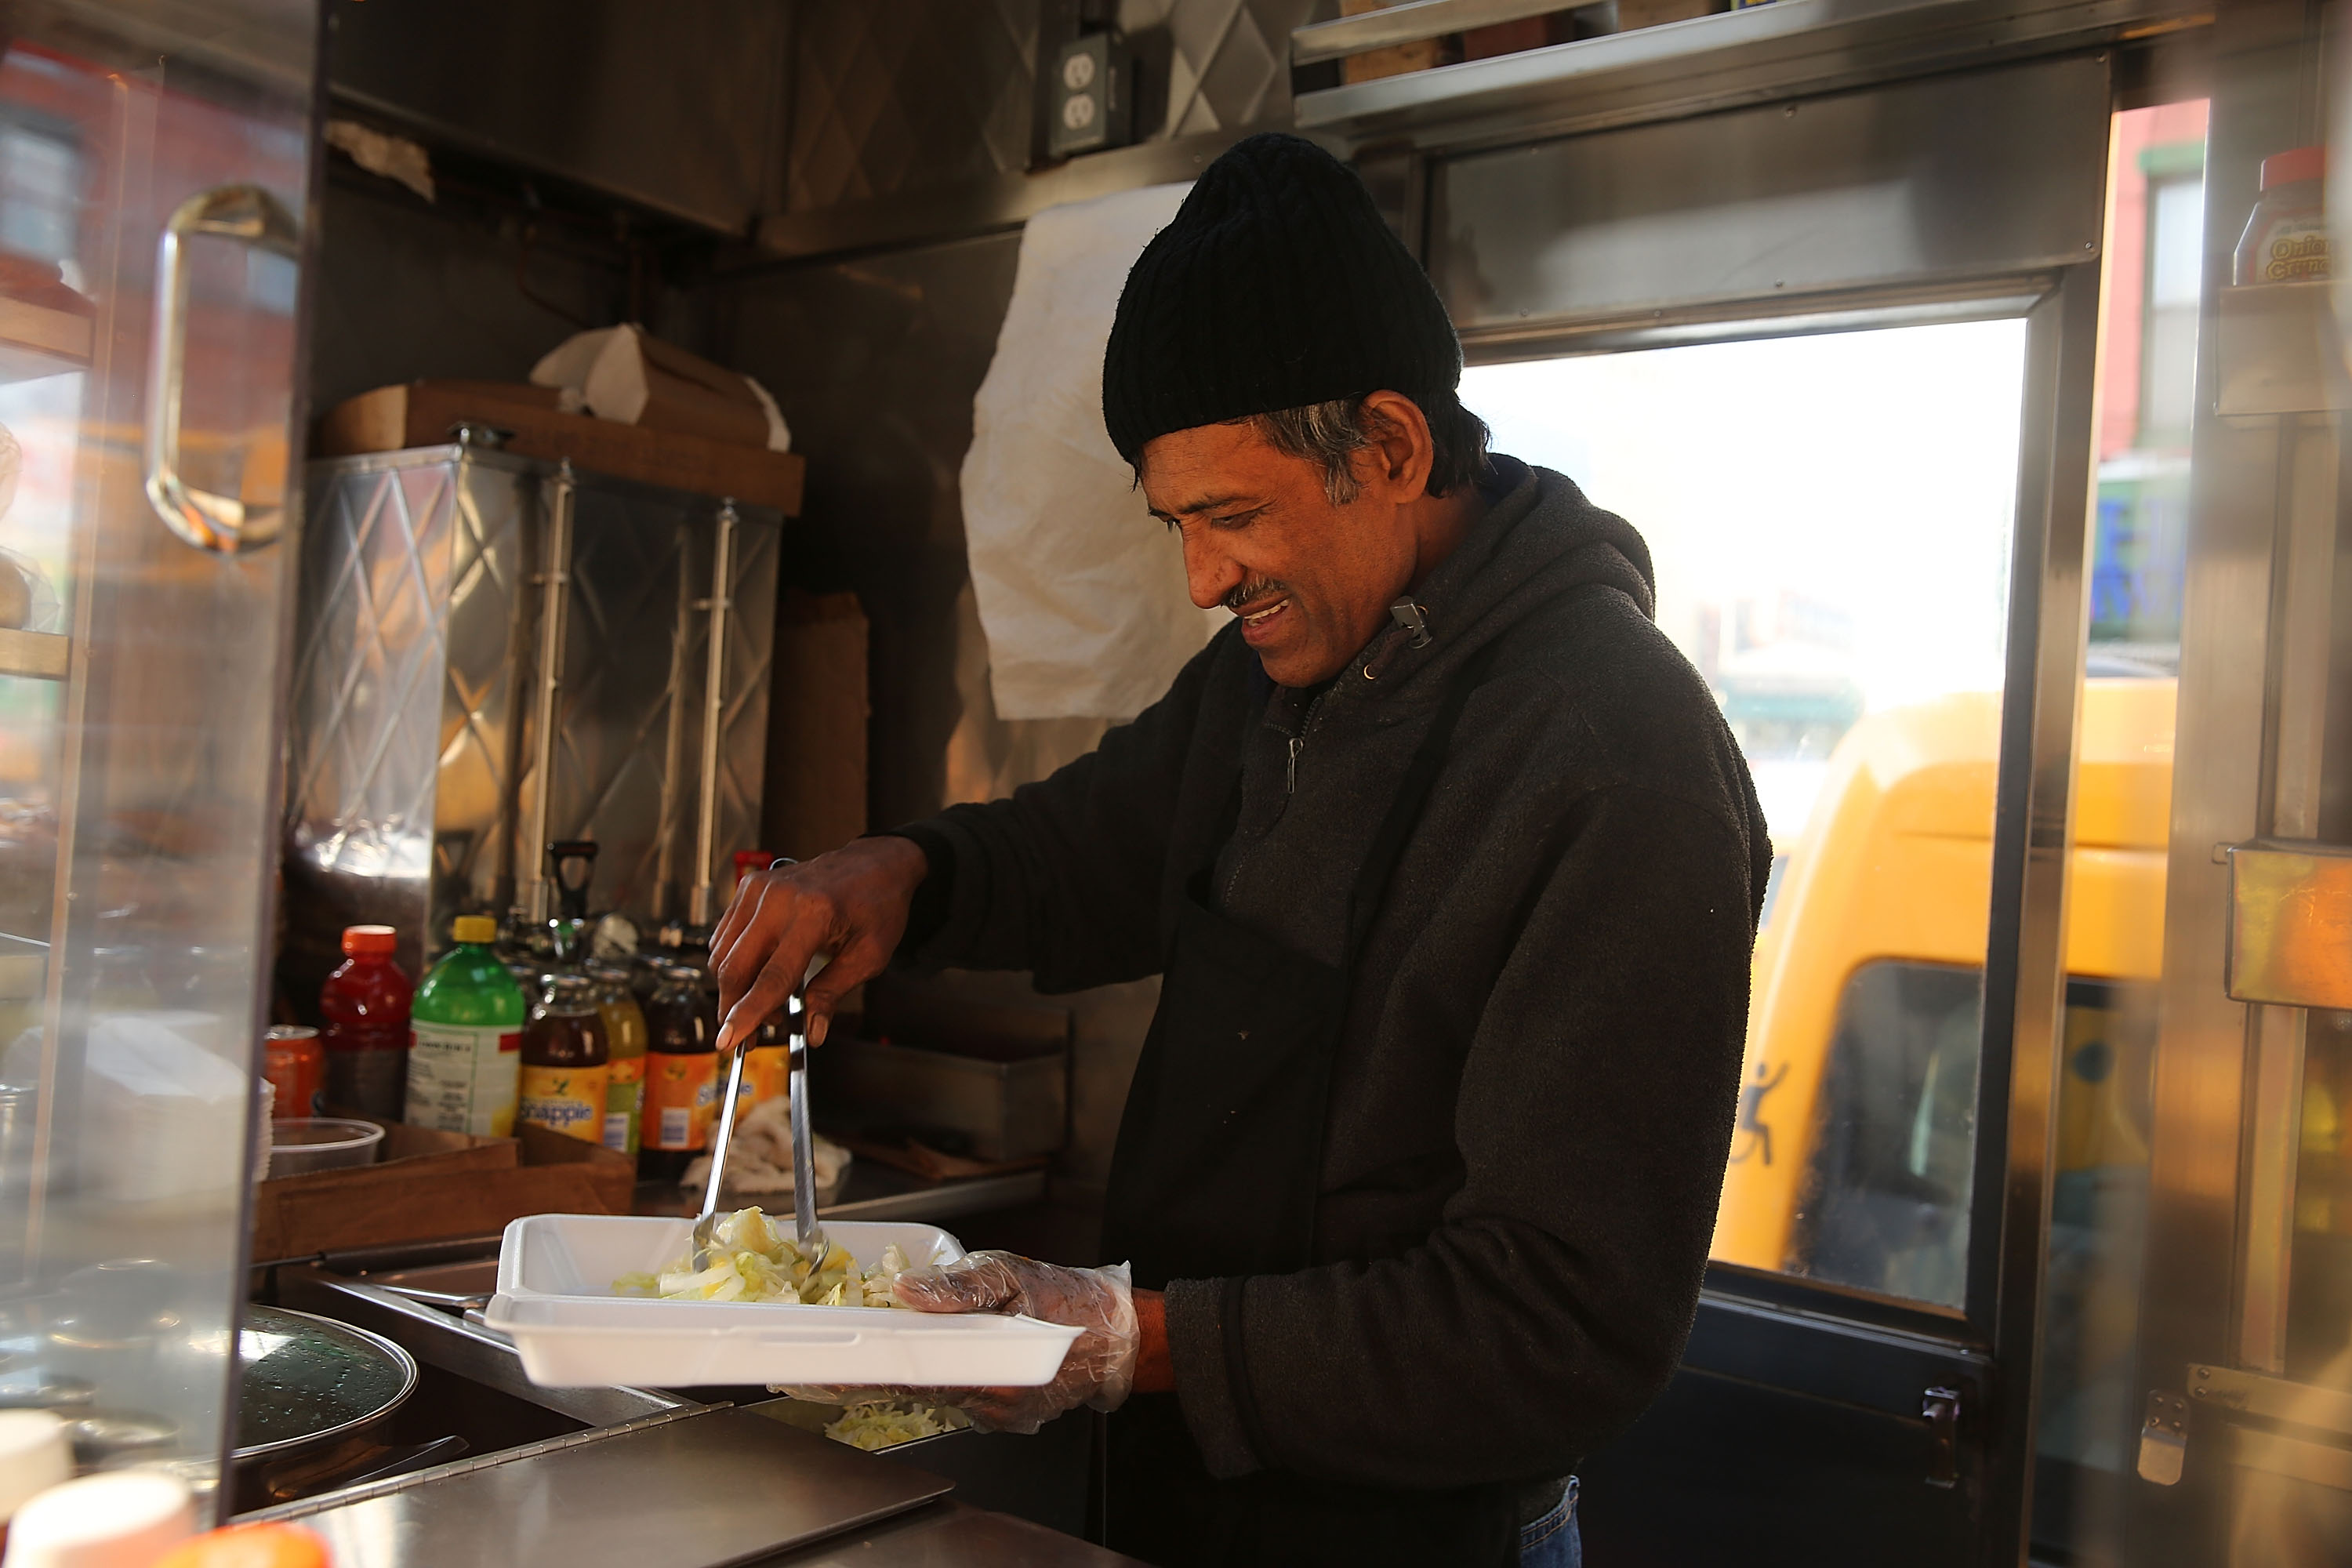 A food cart worker filled a styrofoam take-out container for a customer in New York in 2013. (Spencer Platt—Getty Images)